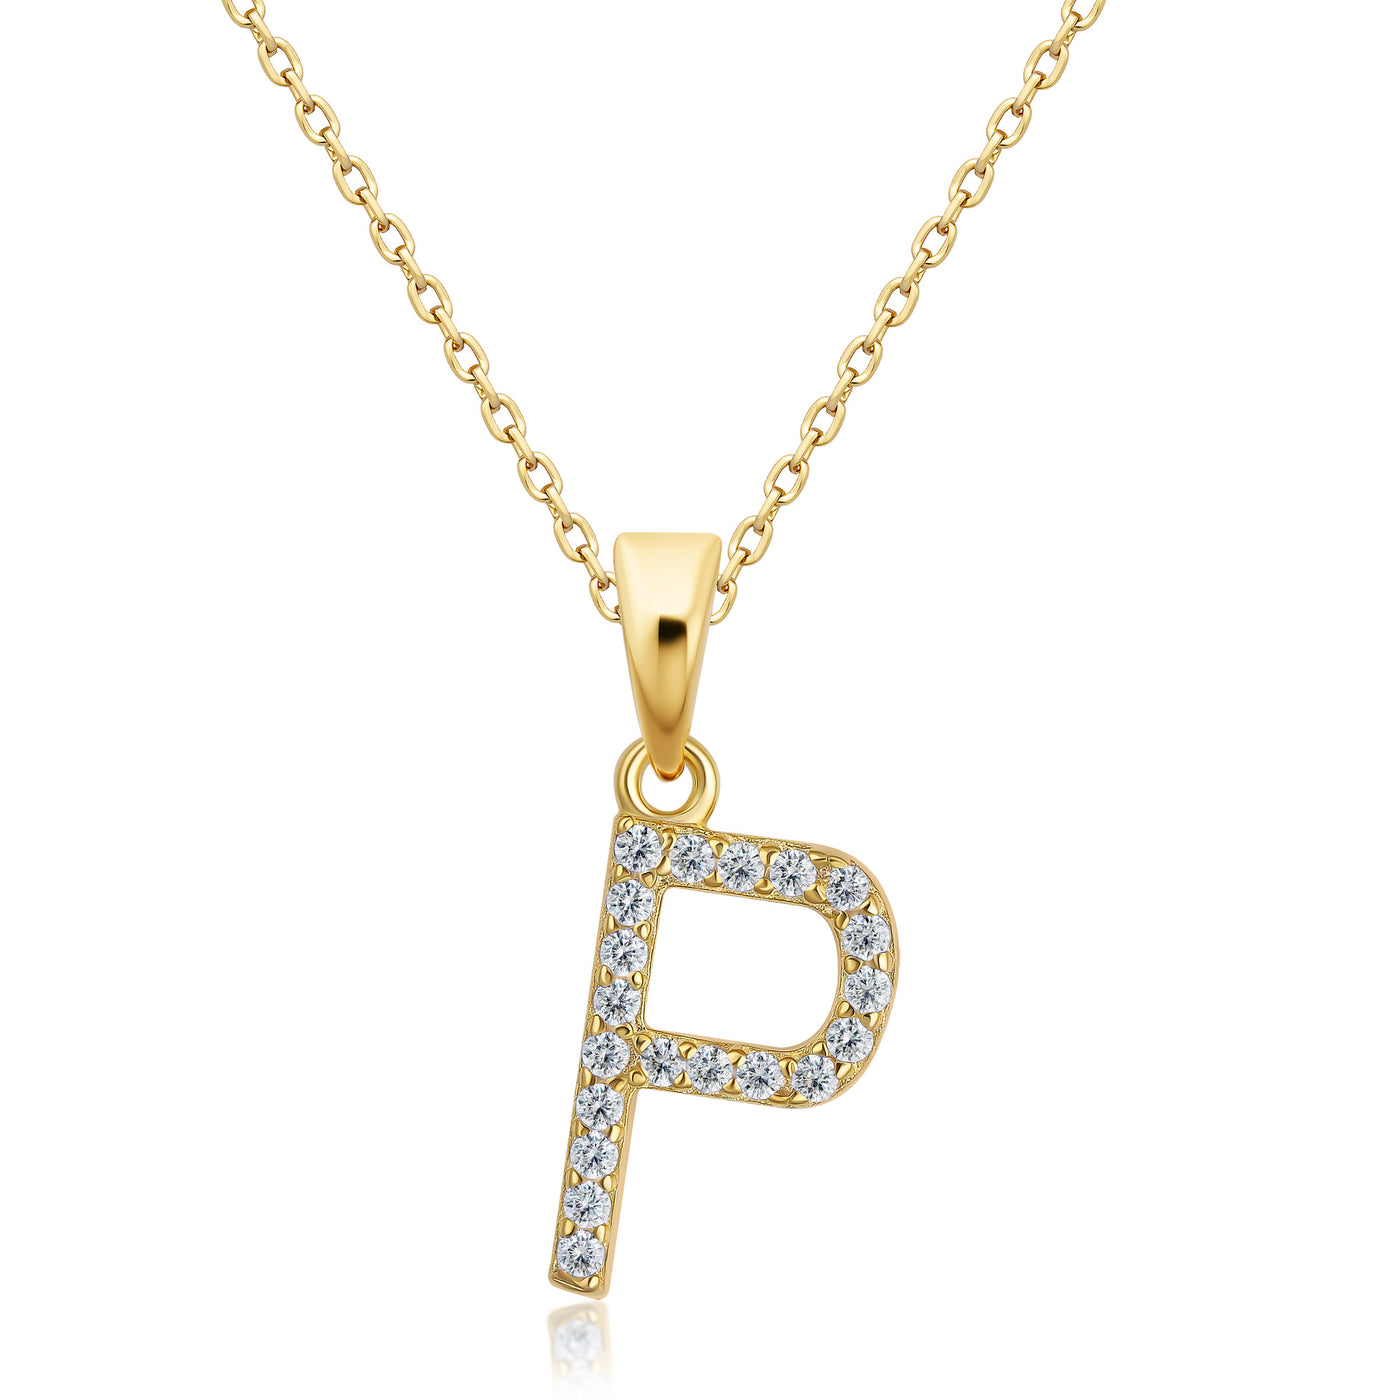 Sterling Silver Personalized Initial Necklaces